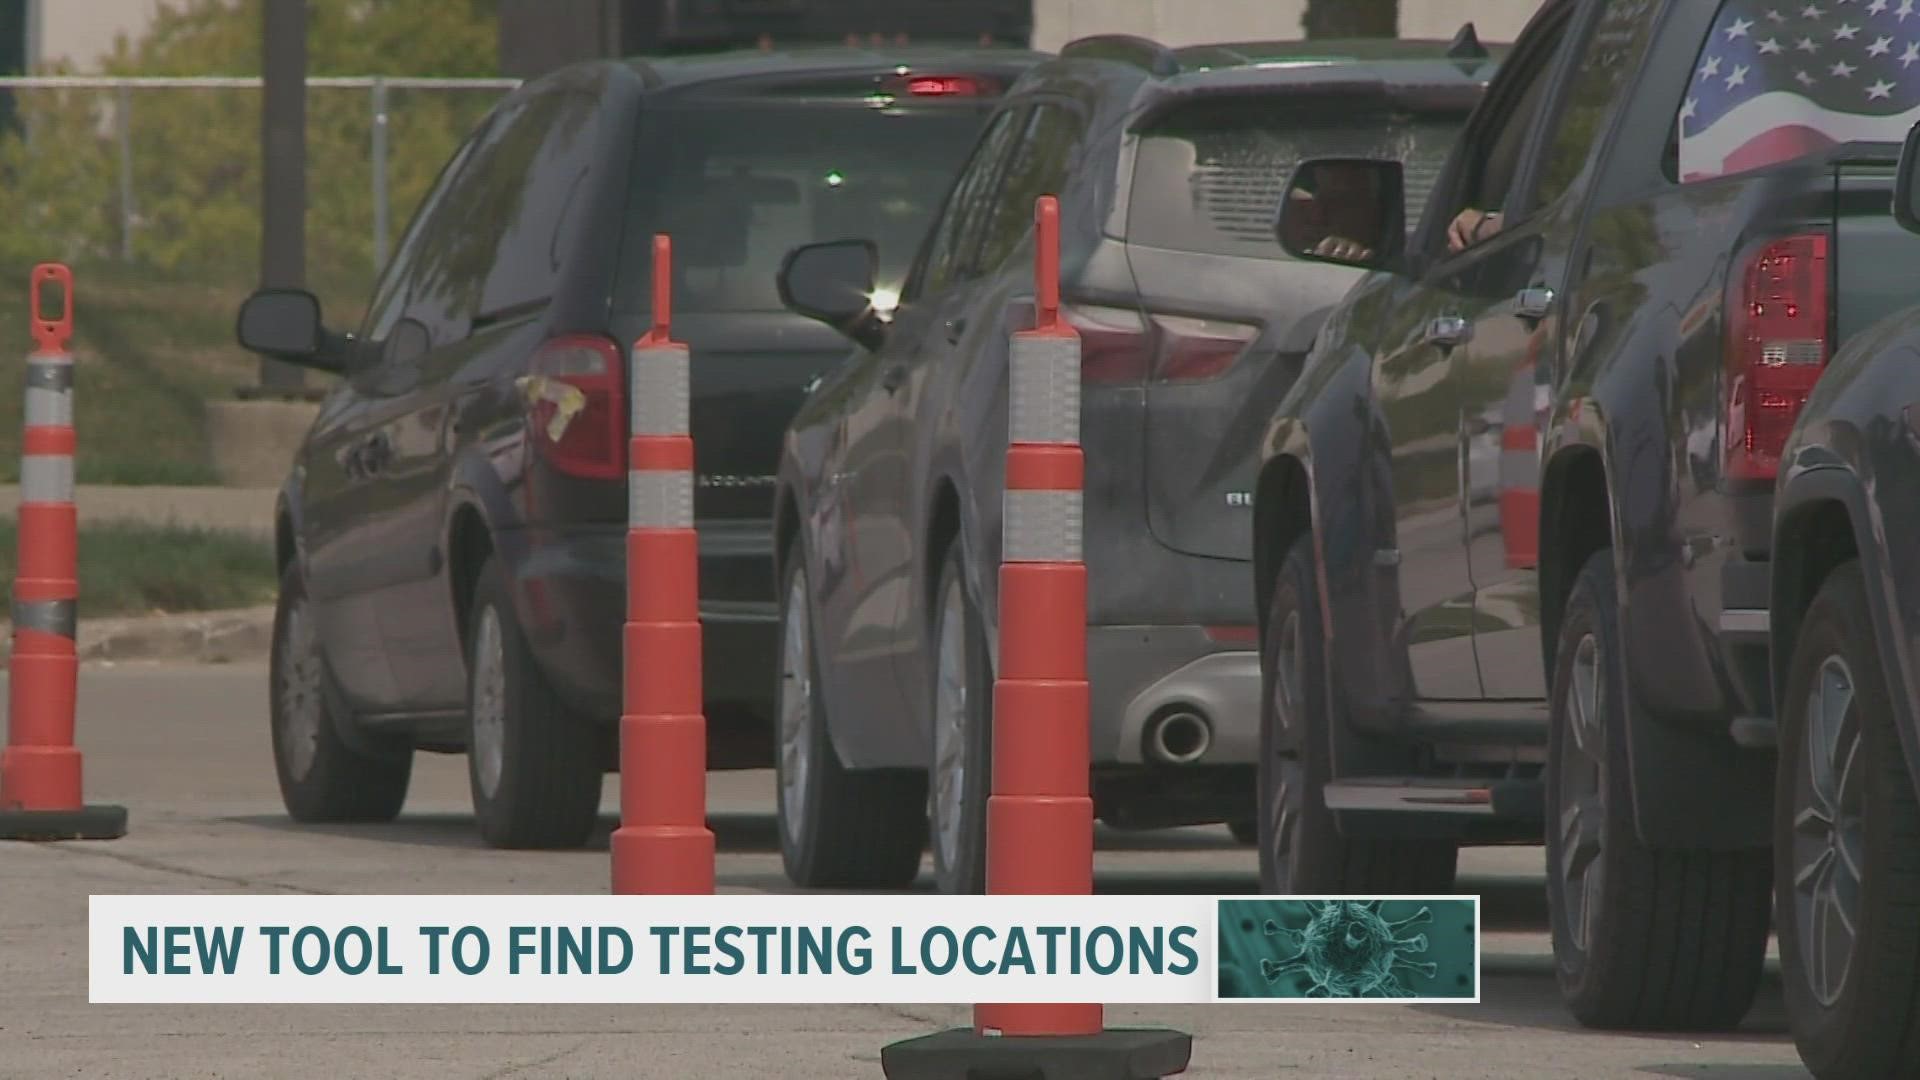 Iowans looking to find COVID-19 testing locations have a new tool to use.